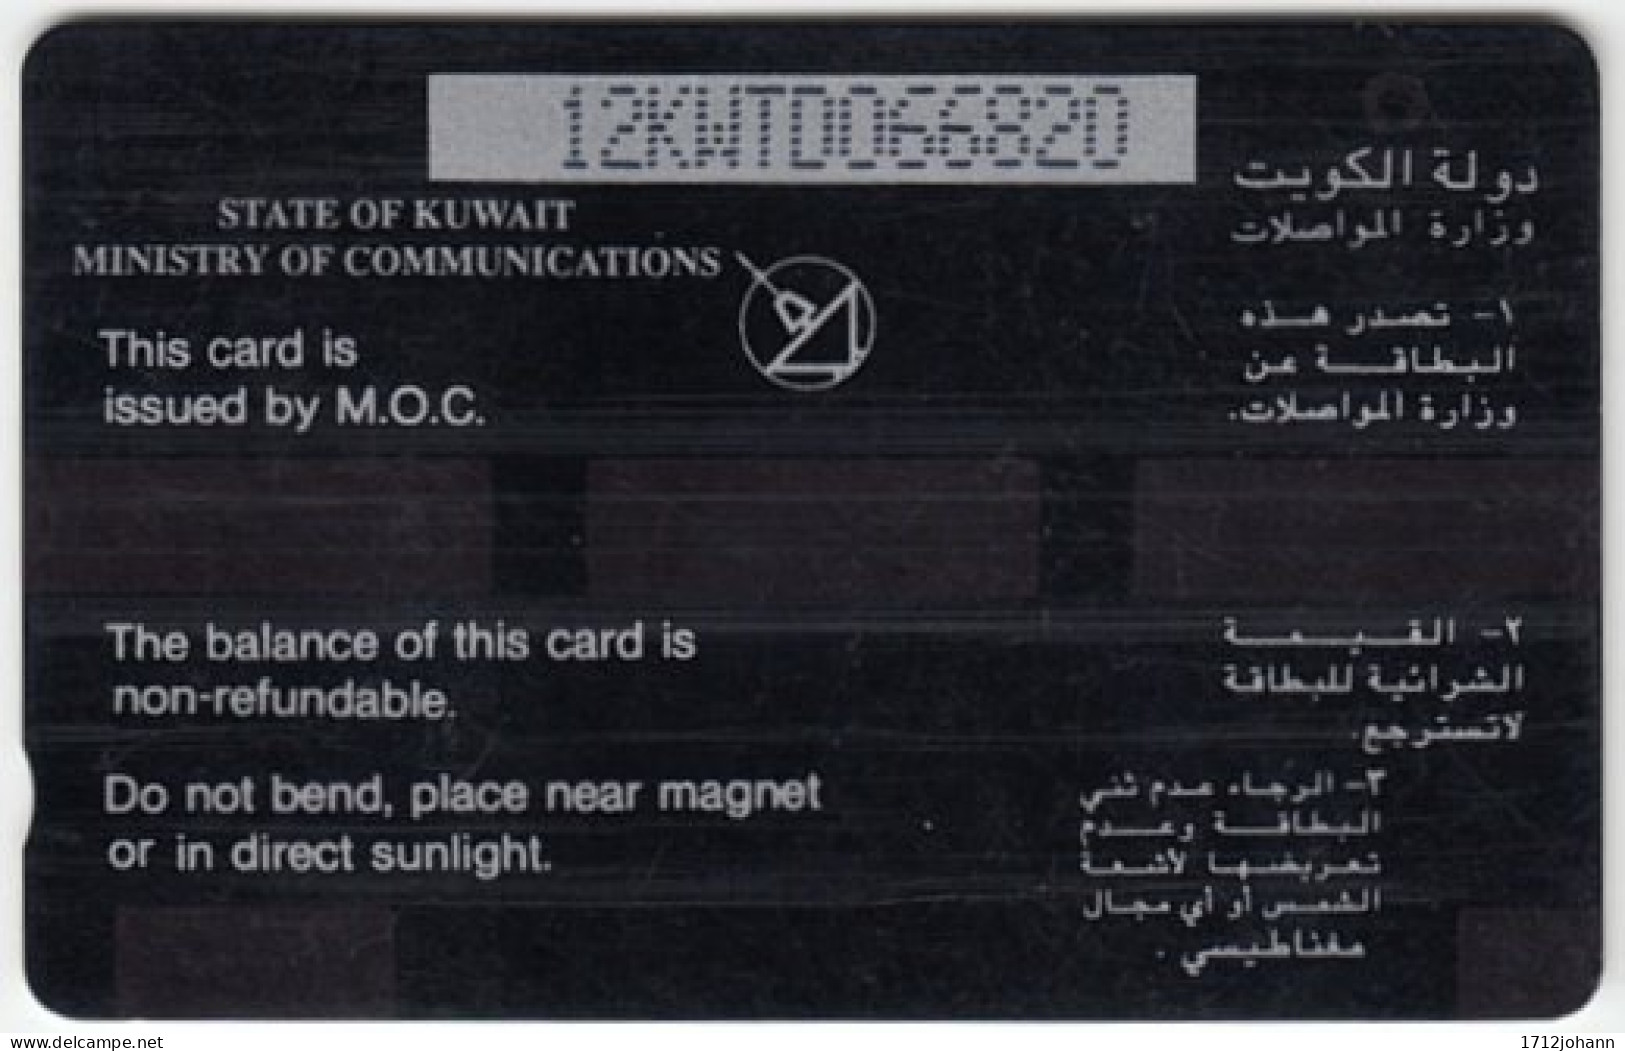 KUWAIT A-175 Magnetic Comm. - Painting, Rural House - 12KWTD - Used - Kuwait